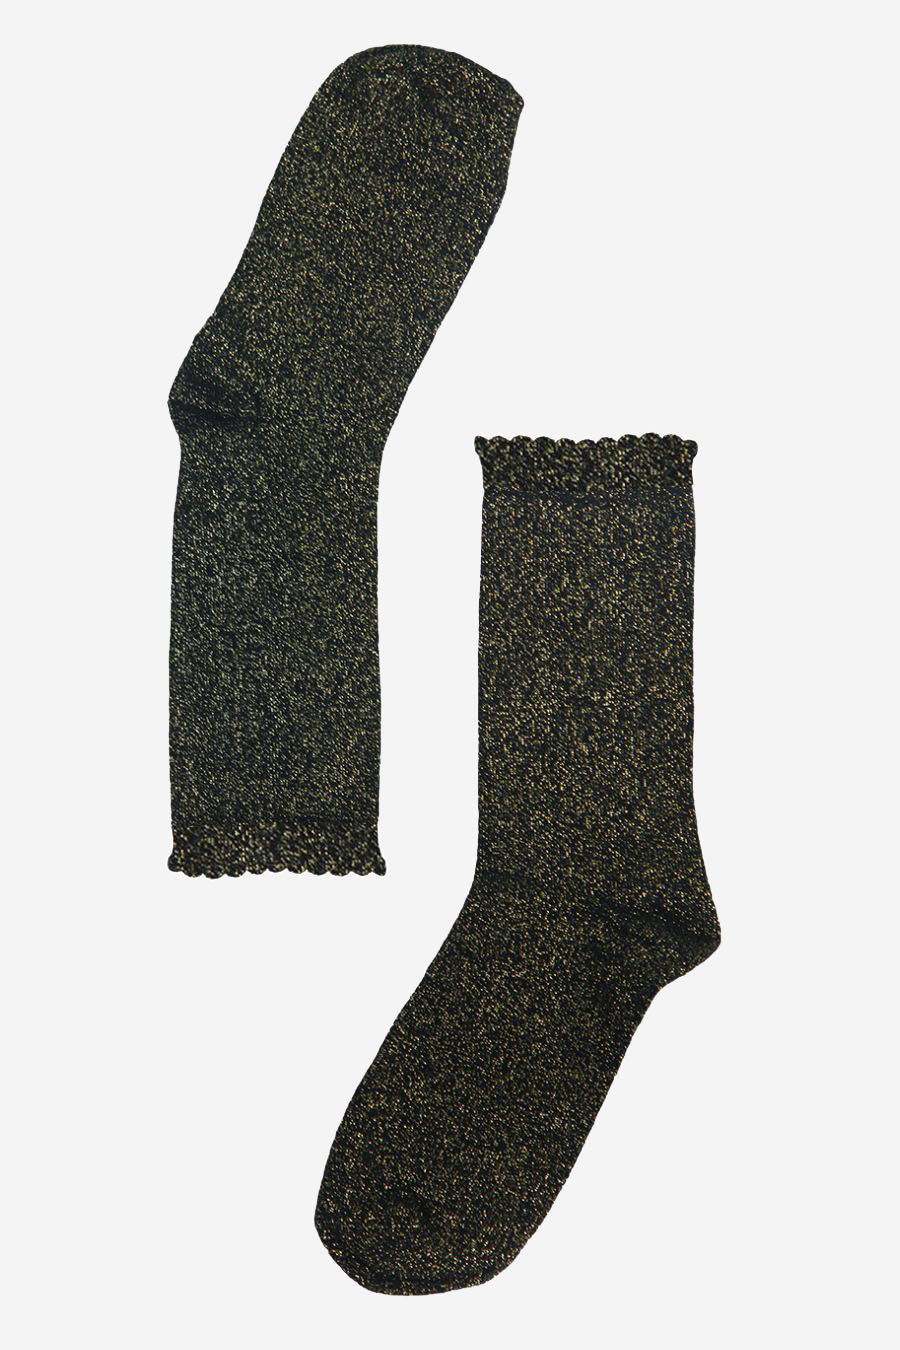 Womens Black Glitter Socks Gold Shimmer Sparkly Ankle Socks with Scalloped Cuff